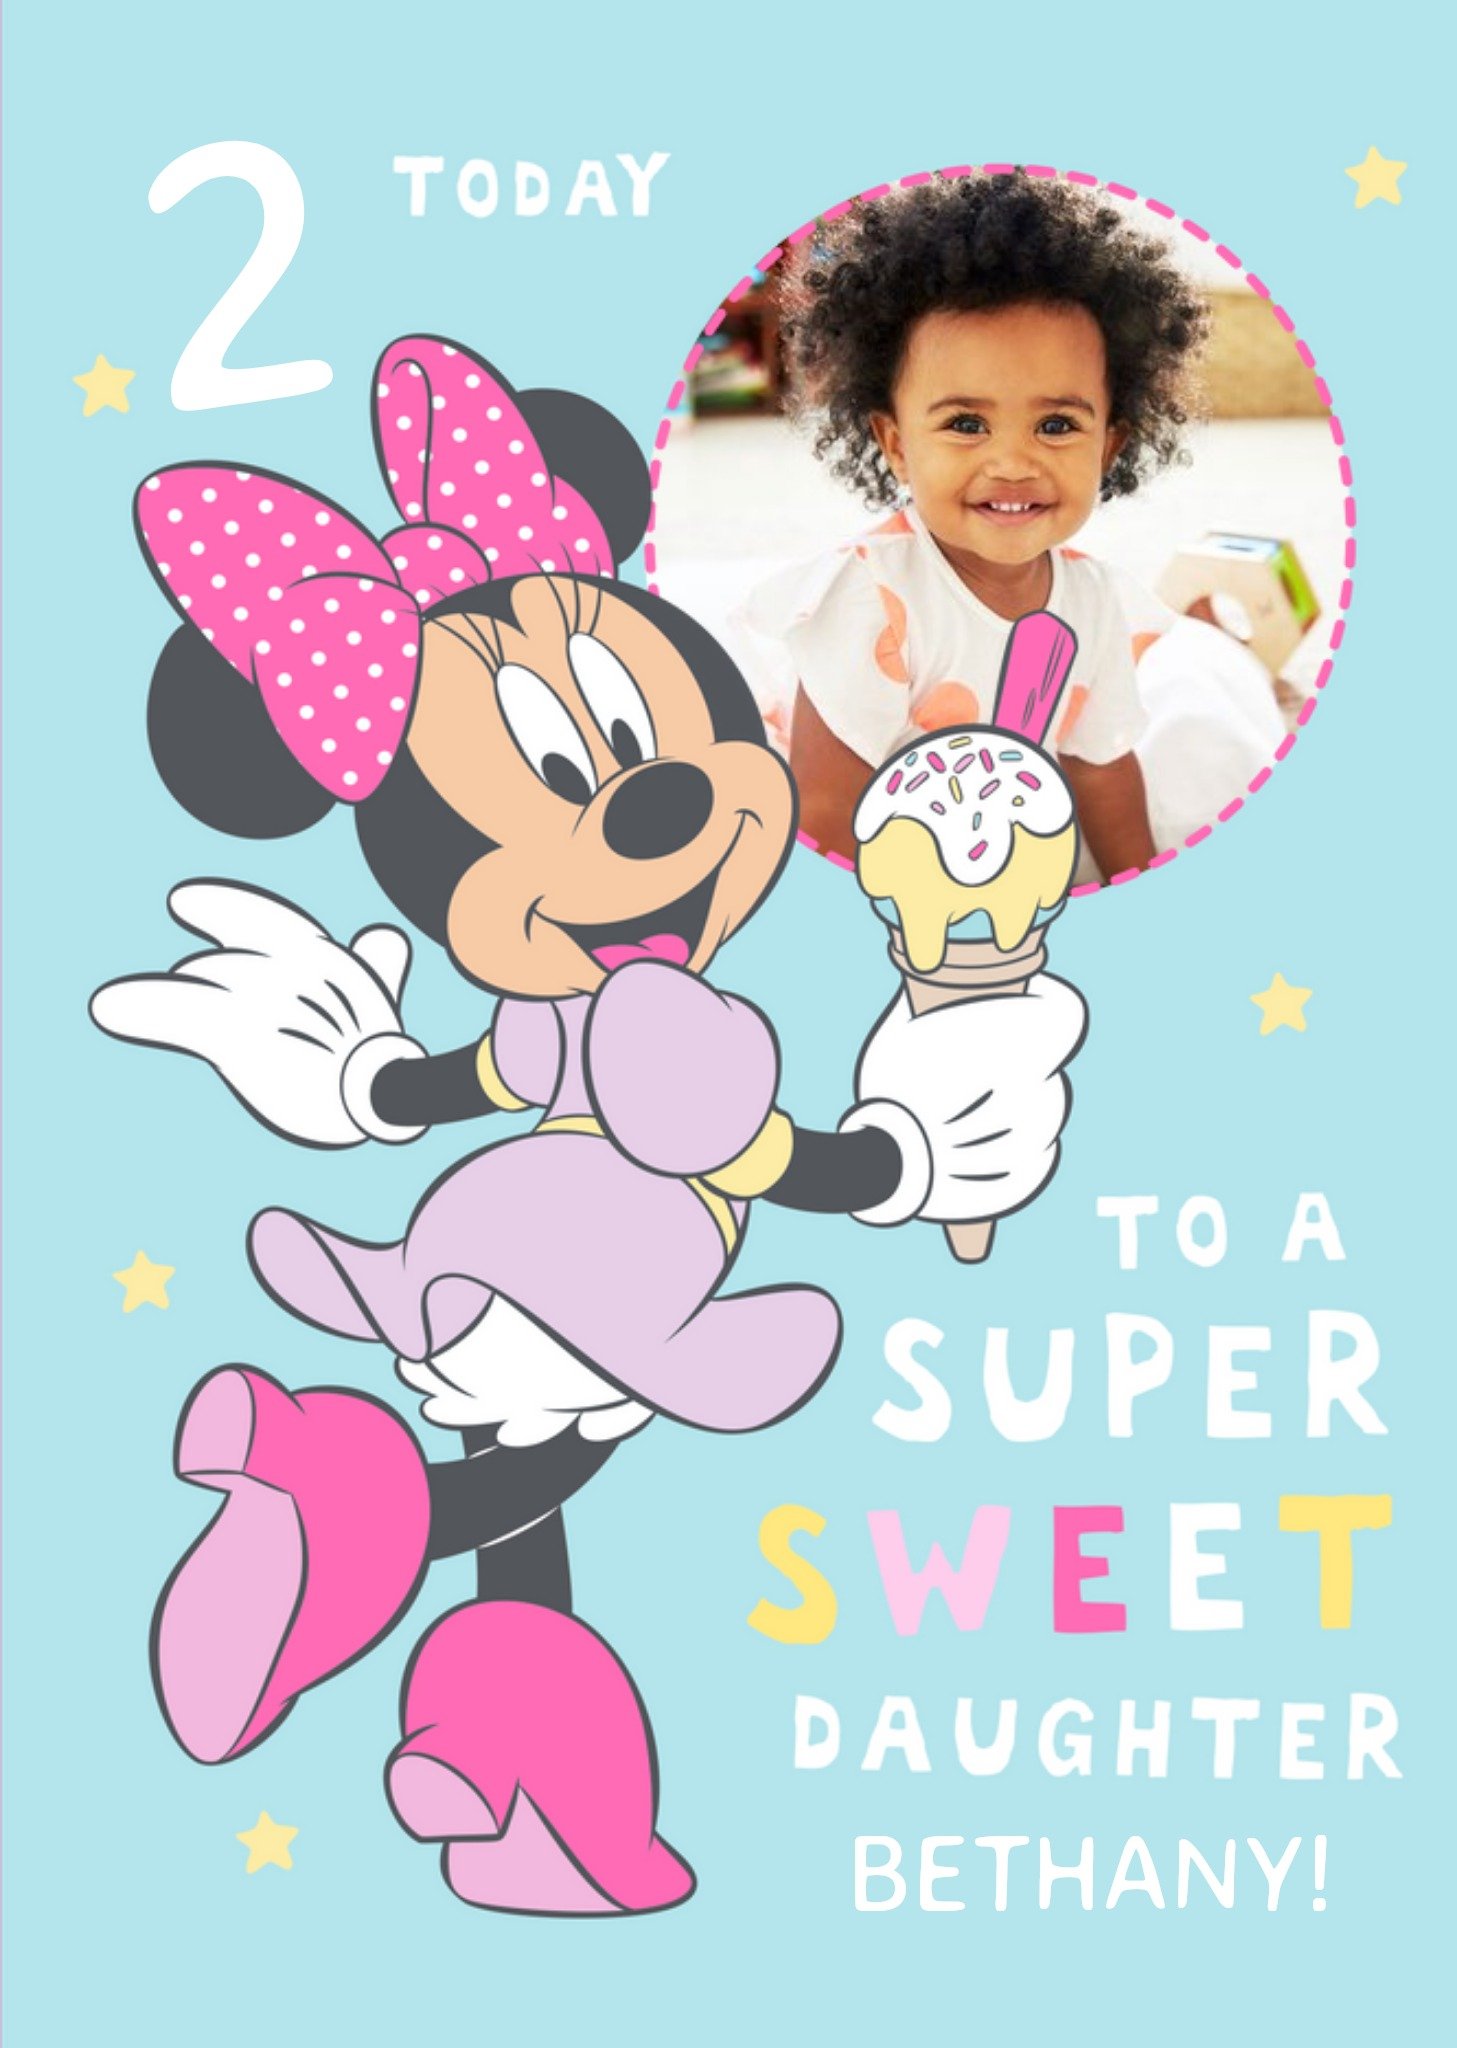 Disney Minnie Mouse Photo Upload To A Super Sweet Daughter 2 Today Ecard